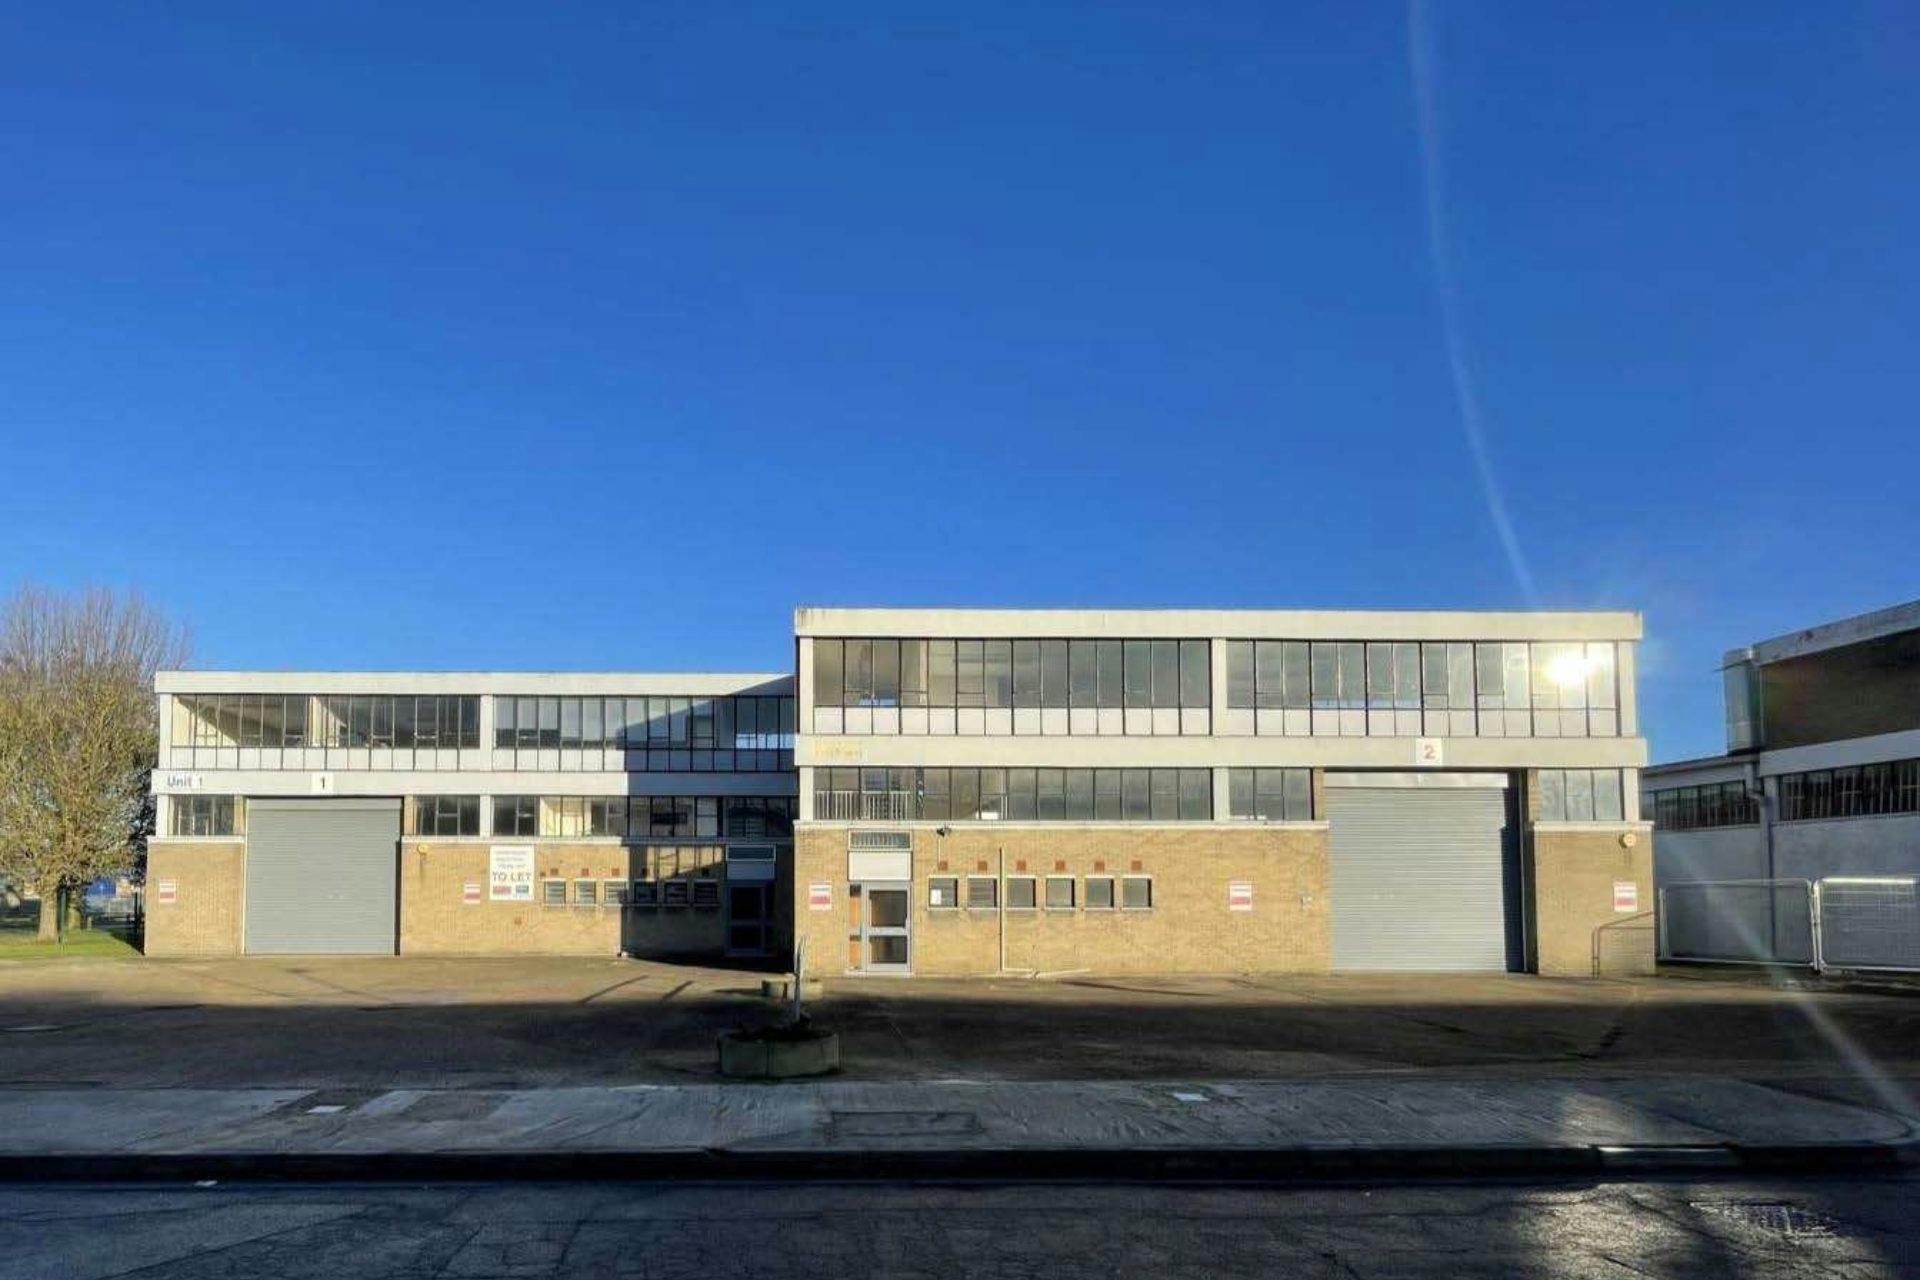 Industrial building with roller shutter doors, a two-storey office section with large windows, and clear blue sky above.